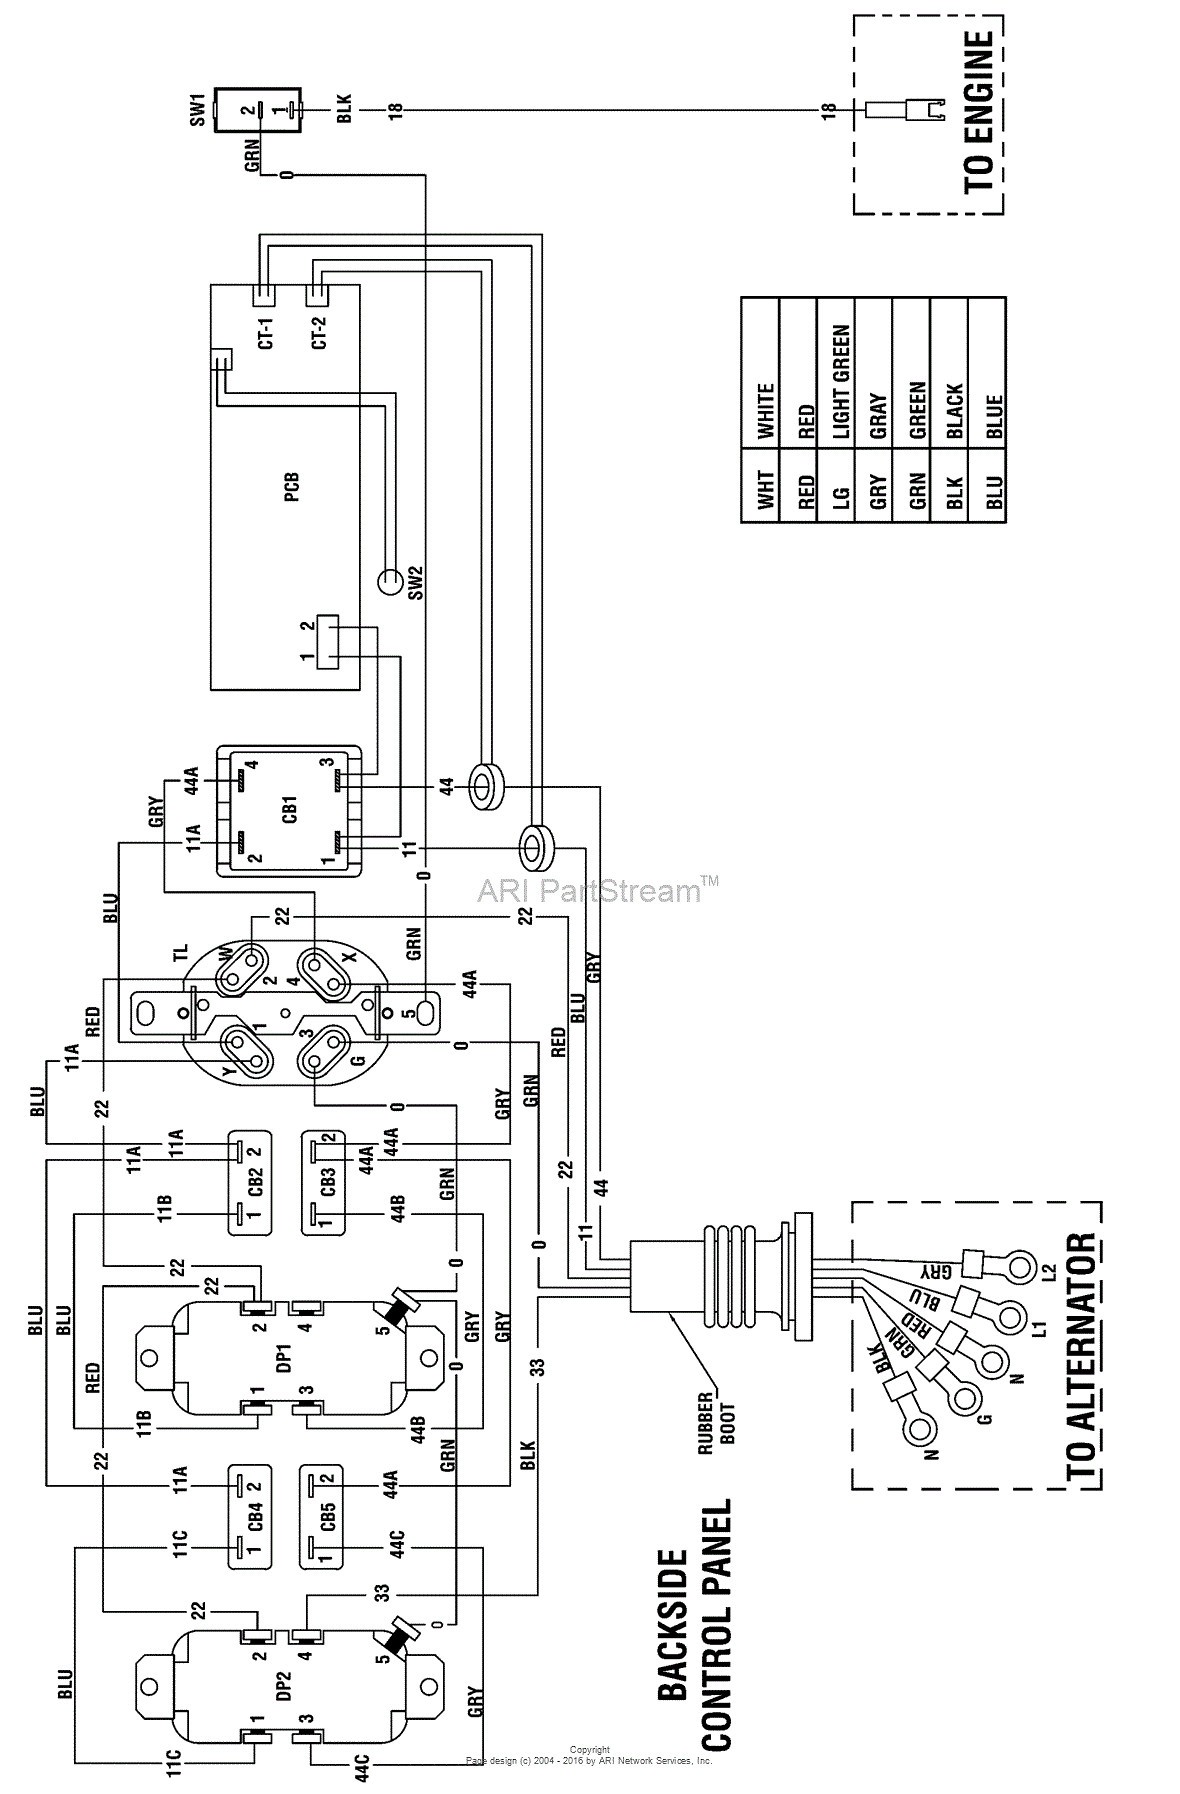 Diagram Briggs And Stratton Wiring 20 Hp 7